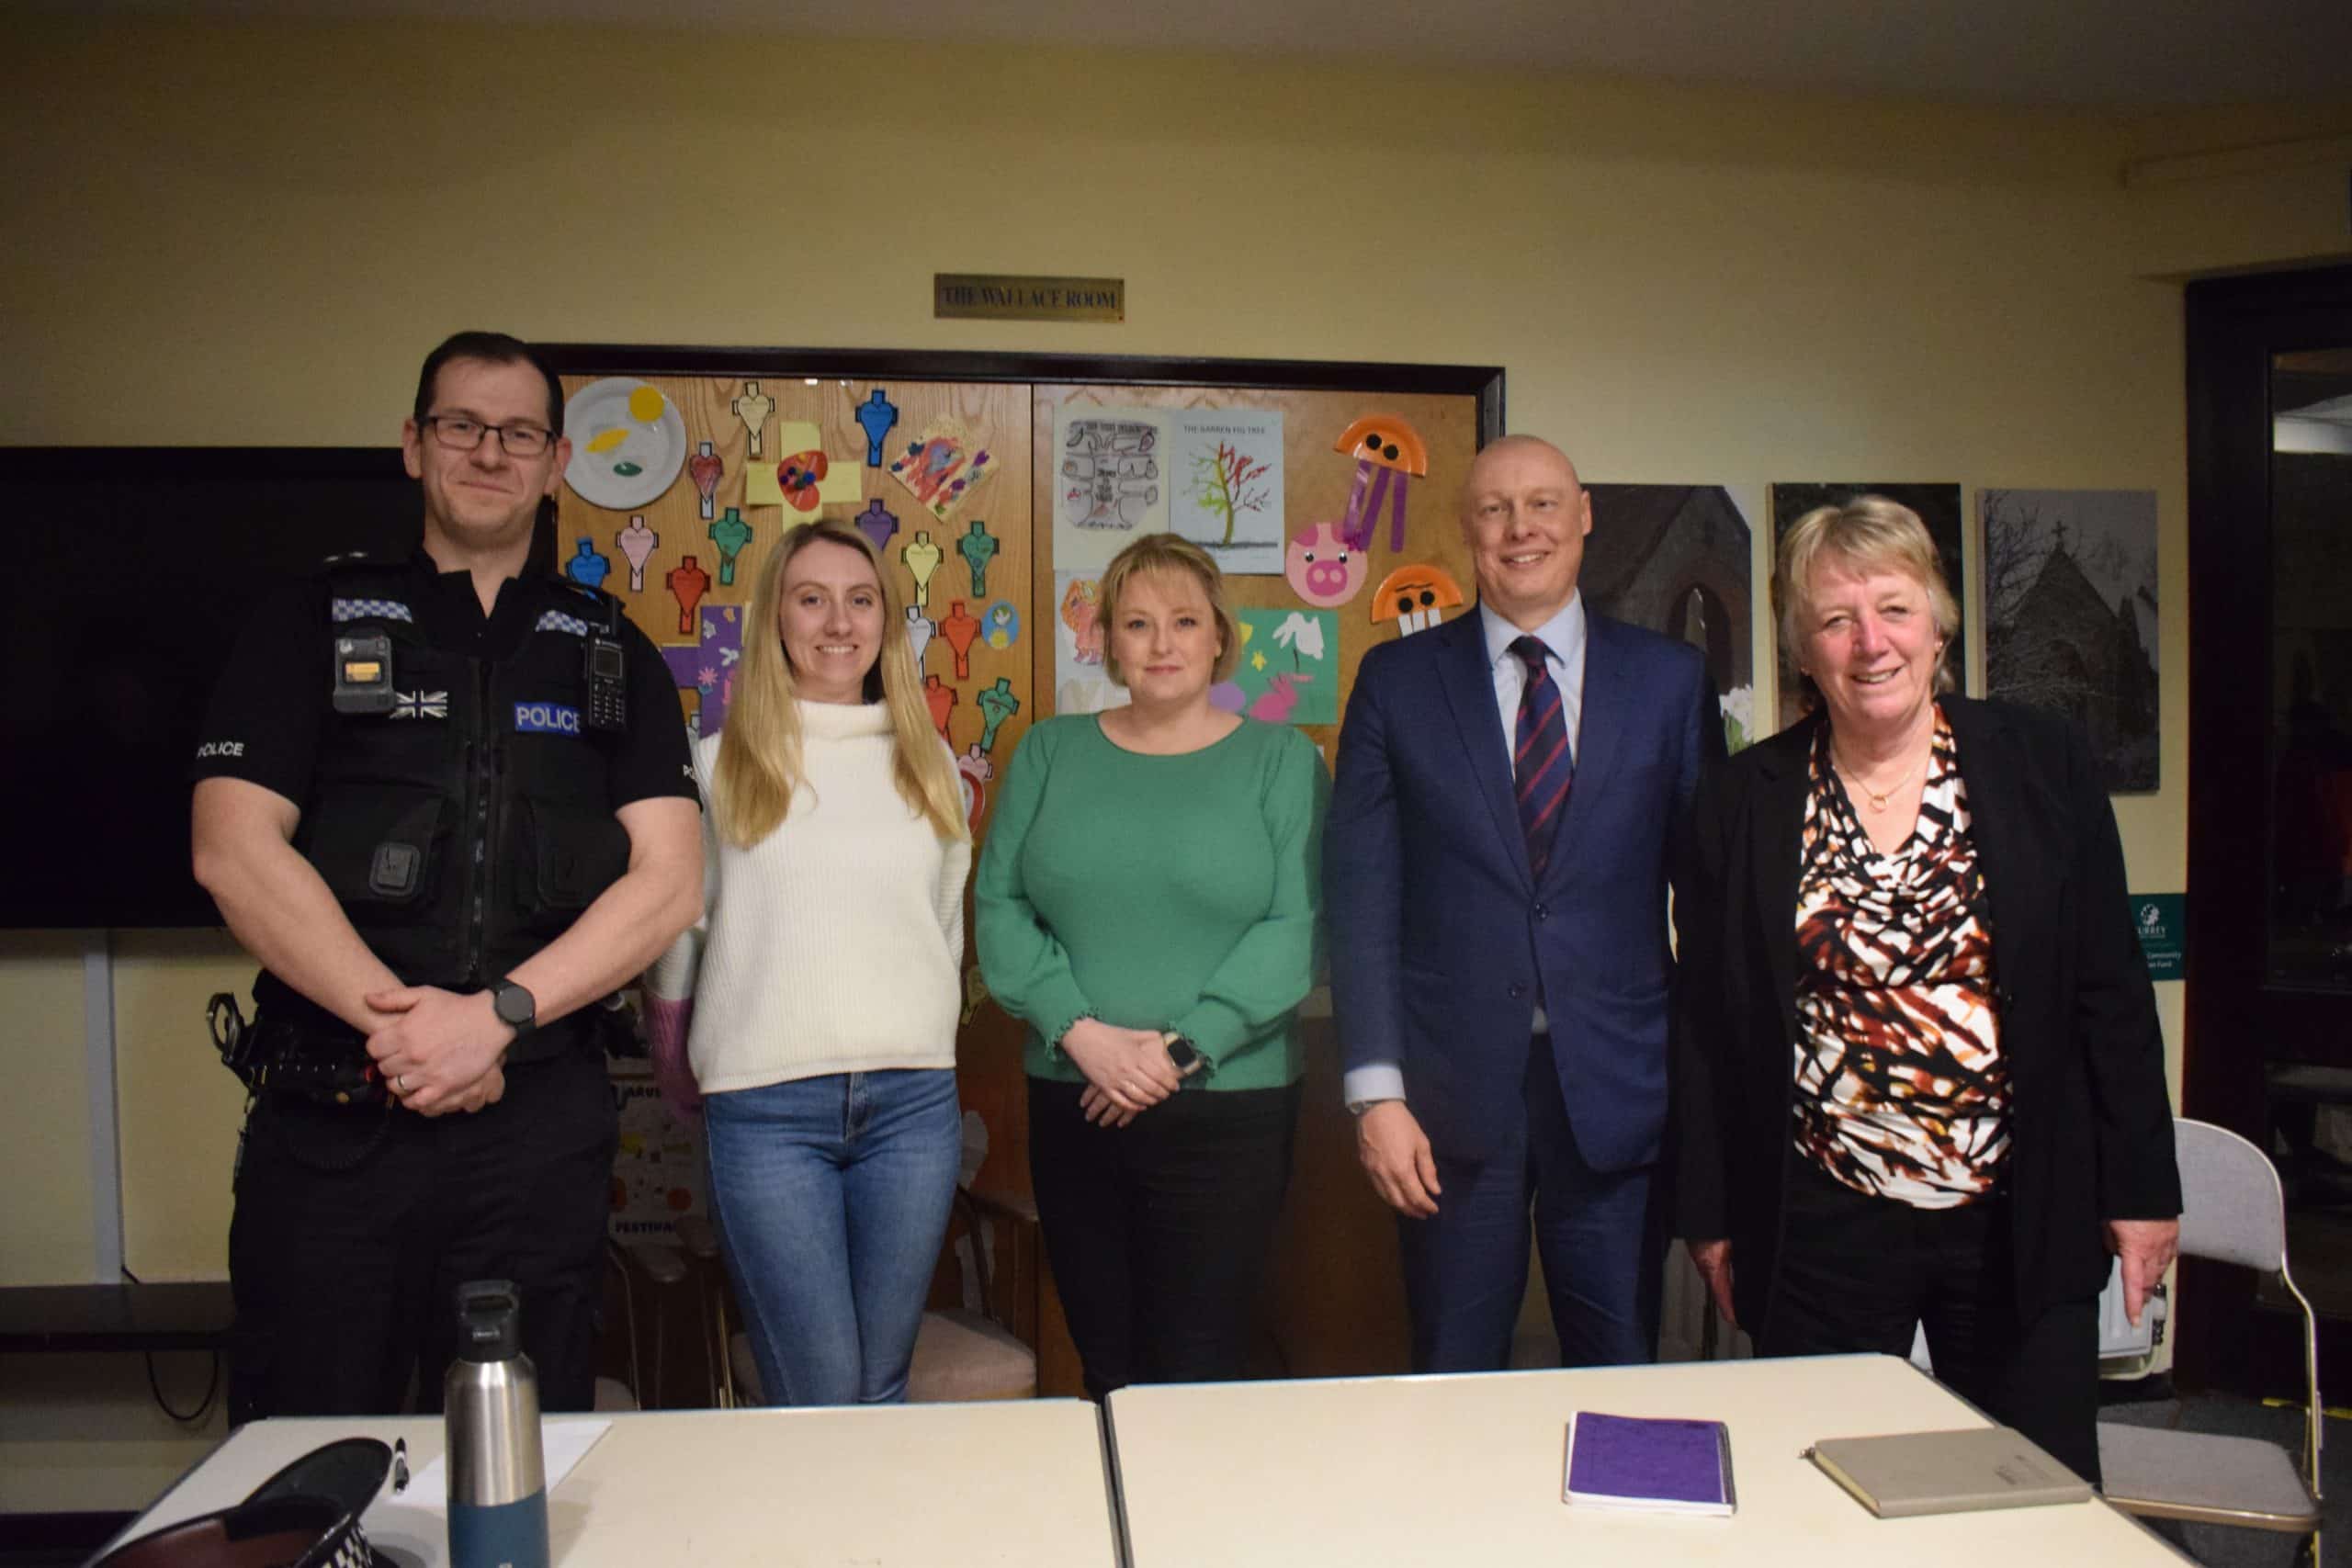 group photo of Police and Crime Commissioner Lisa Townsend with Deputy Police and Crime Commissioner Ellie Vesey-Thompson, police officer and local councillors